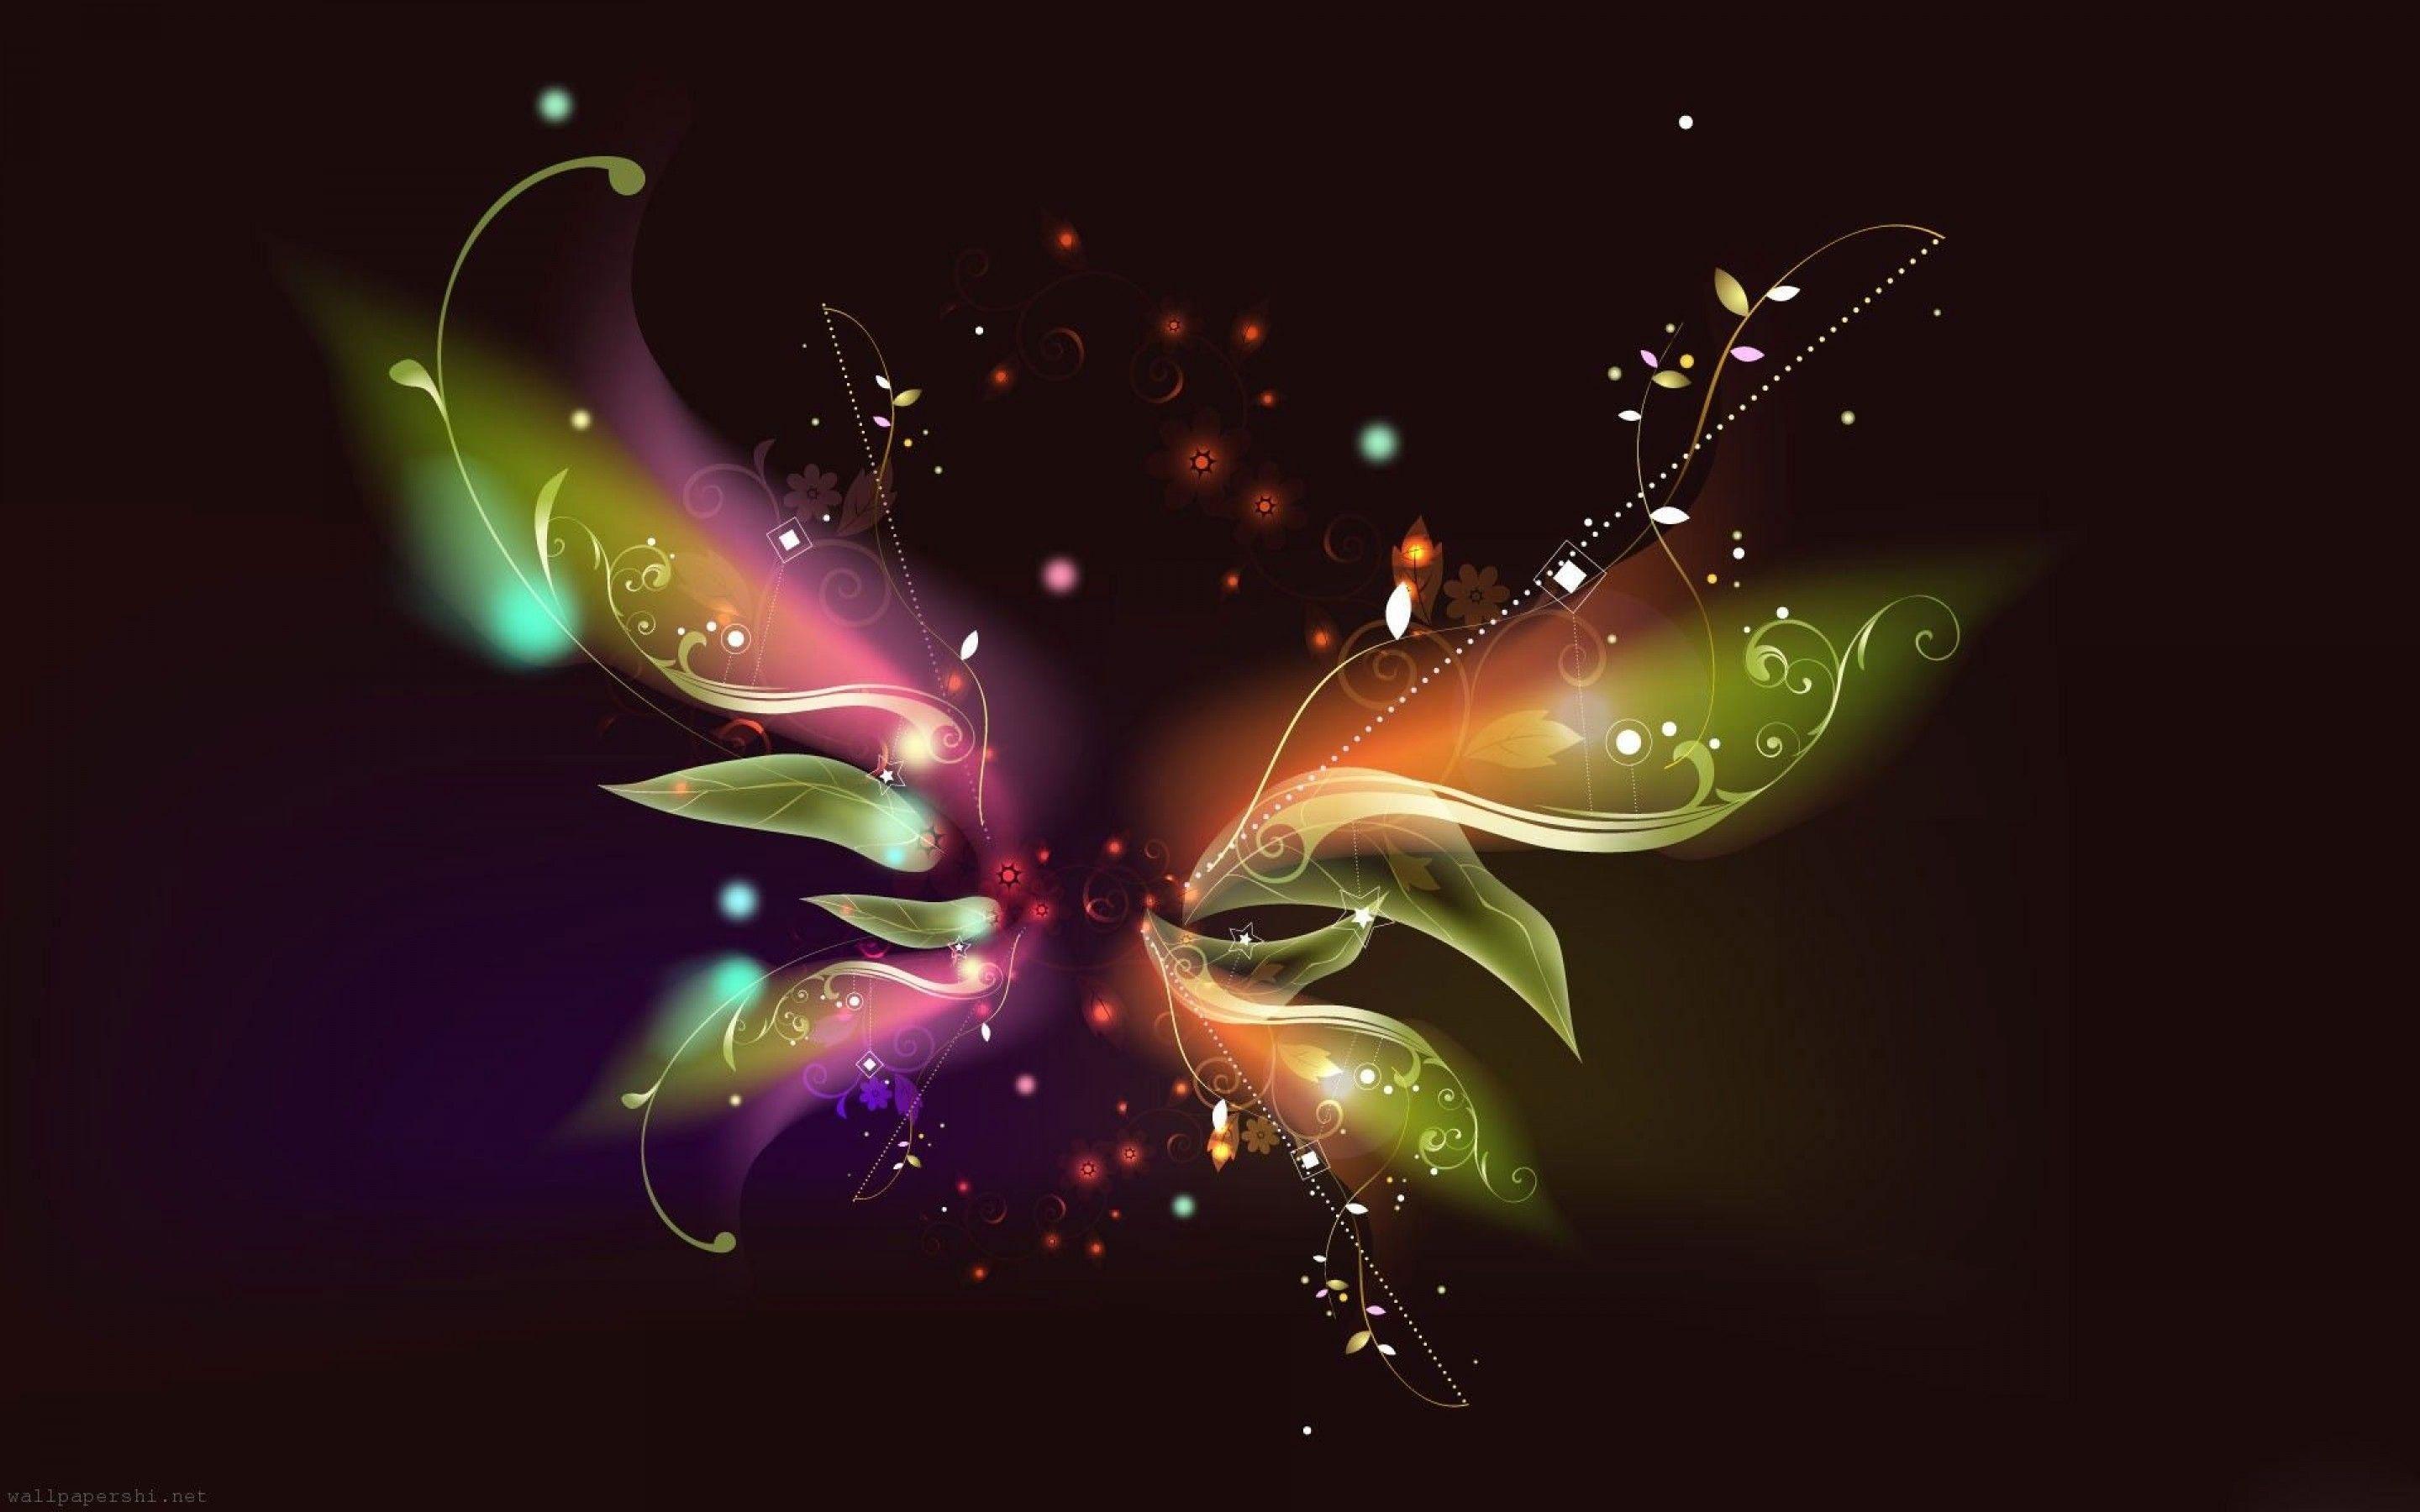 Wallpapers Butterfly - Wallpaper Cave